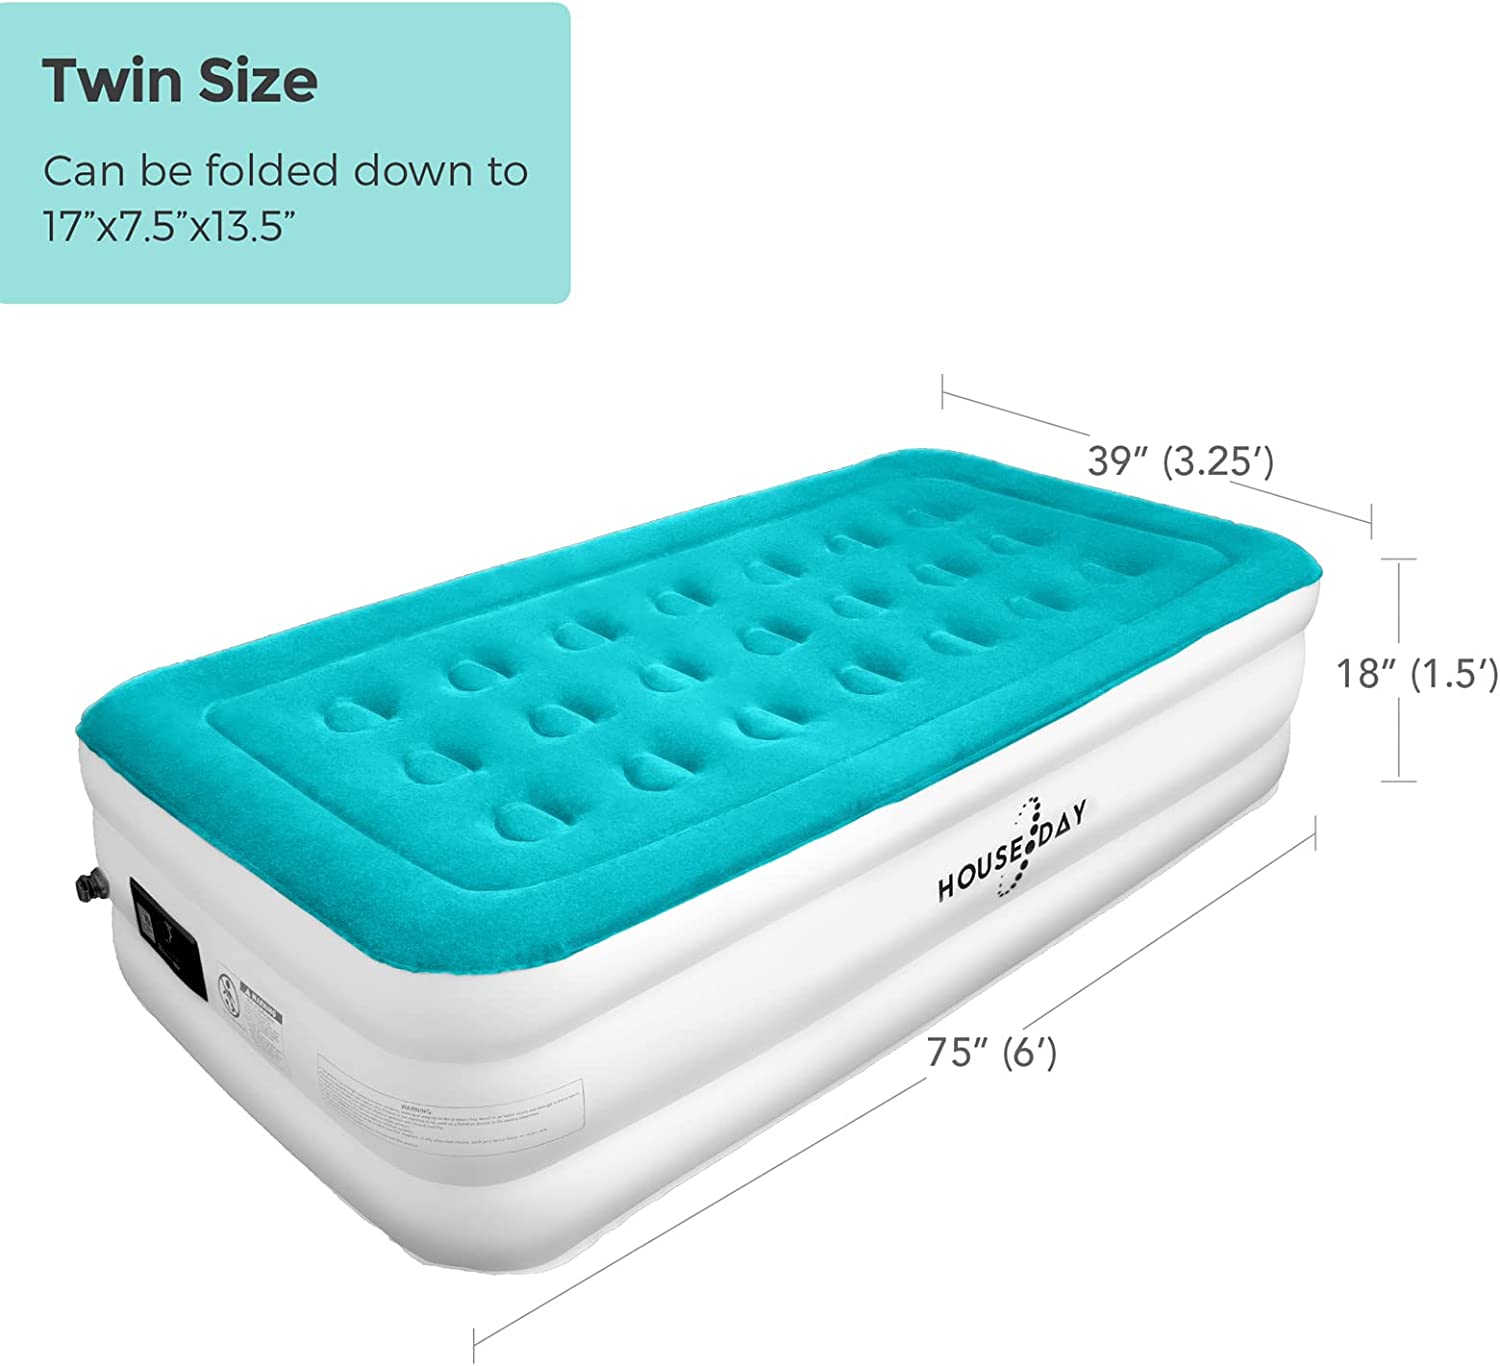 HOUSE DAY Twin Air Mattress with Built- Raised Electric Airbed with Built in Pump Fast Inflation Carry Bag Highest End Blow Up Bed, Inflatable Air Mattresses for Home Travel Twin Matress 74x39x18